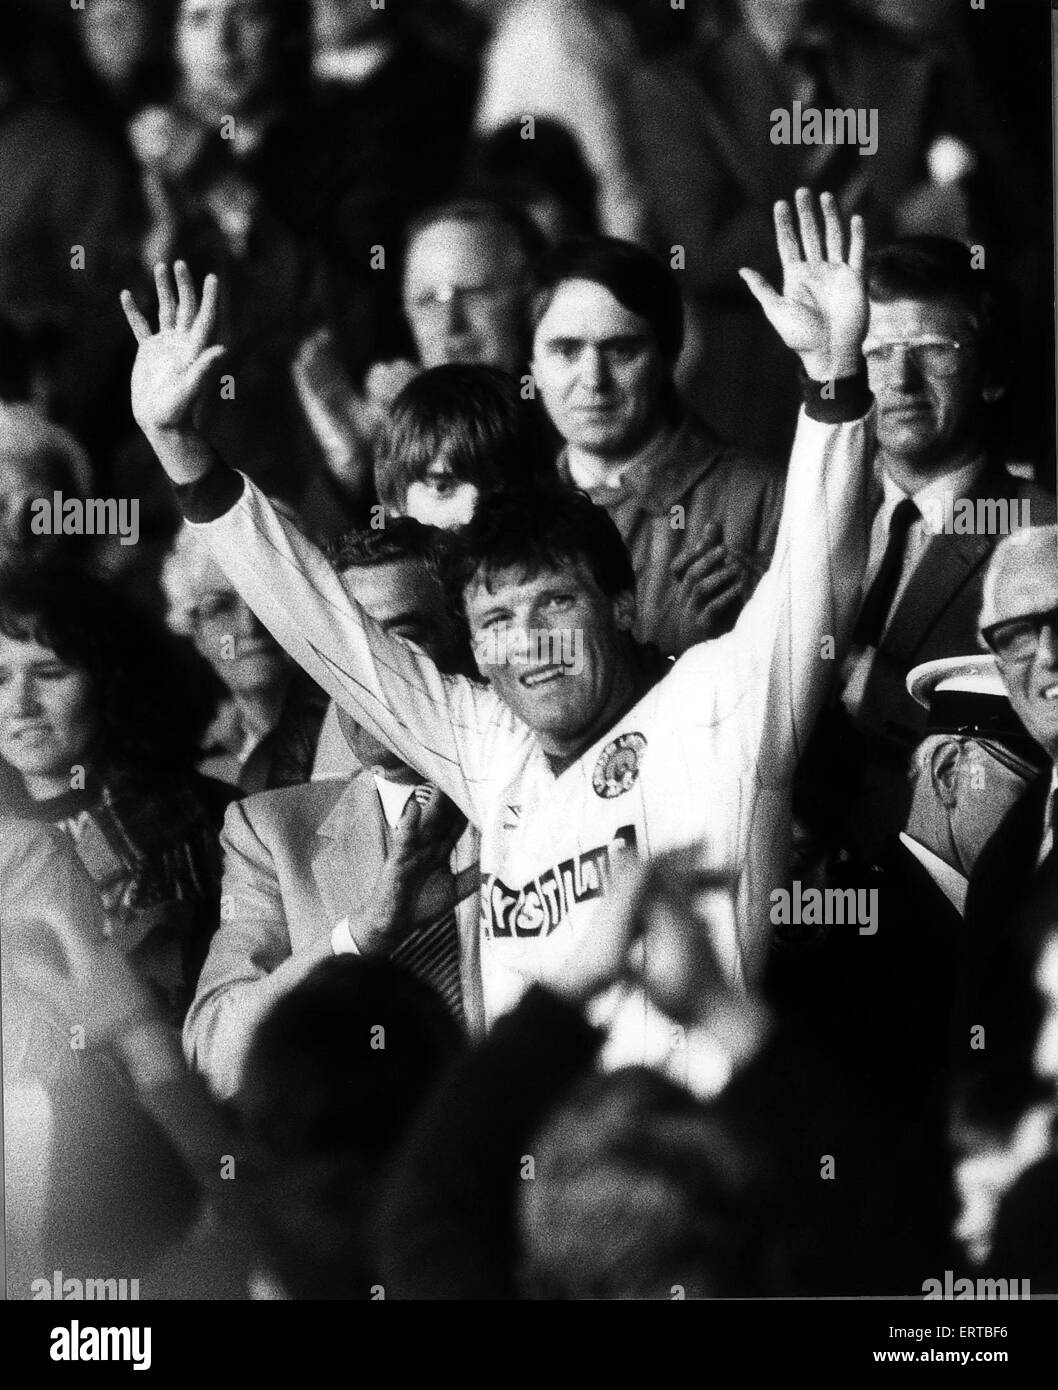 Leeds manager Eddie Gray waves to the fans from the stand after his last playing game for Leeds. Leeds V Charlton Athletic 12th May 1984. Stock Photo